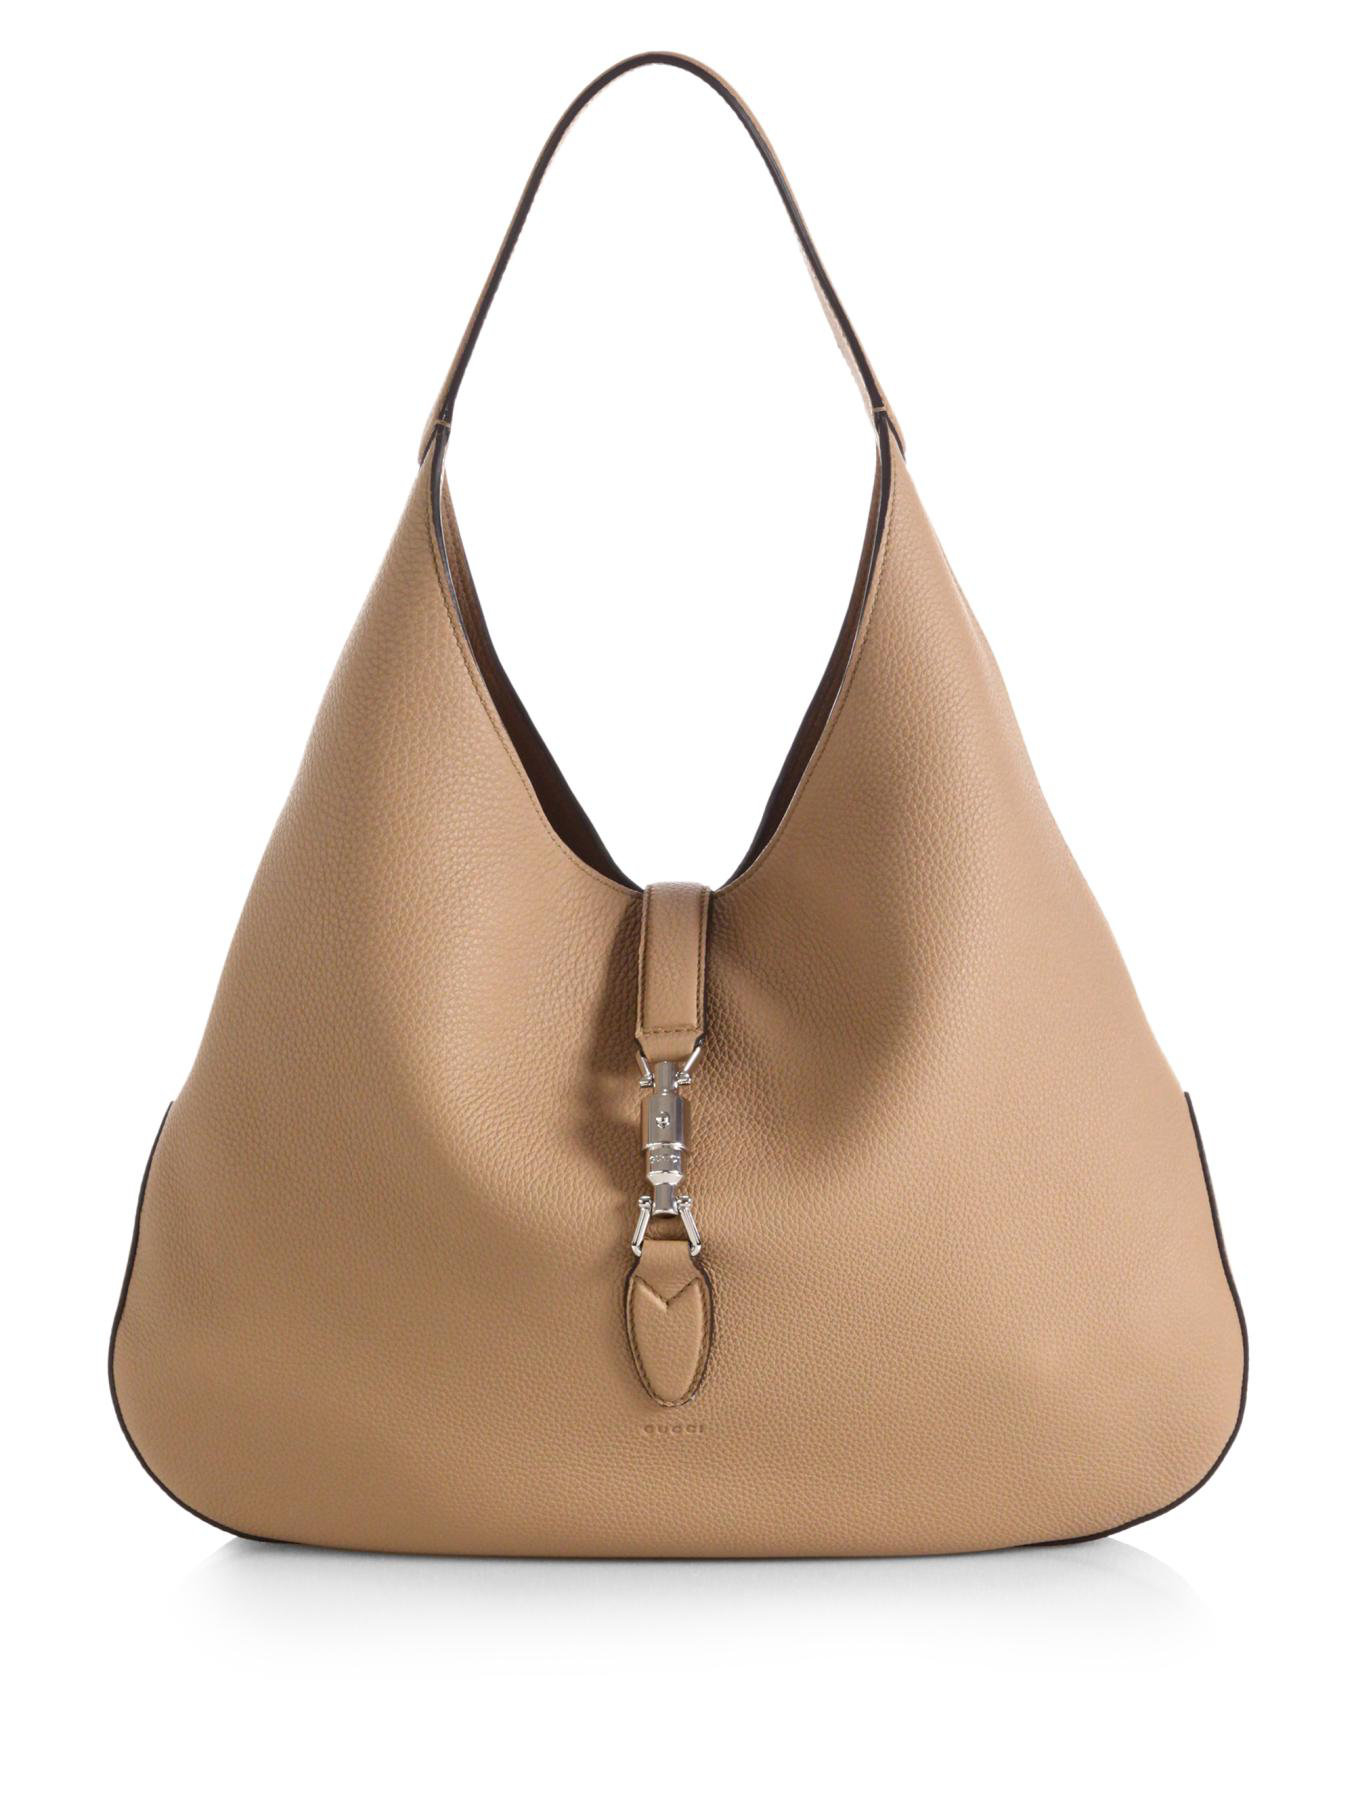 Gucci Jackie Soft Leather Hobo Bag in Brown | Lyst